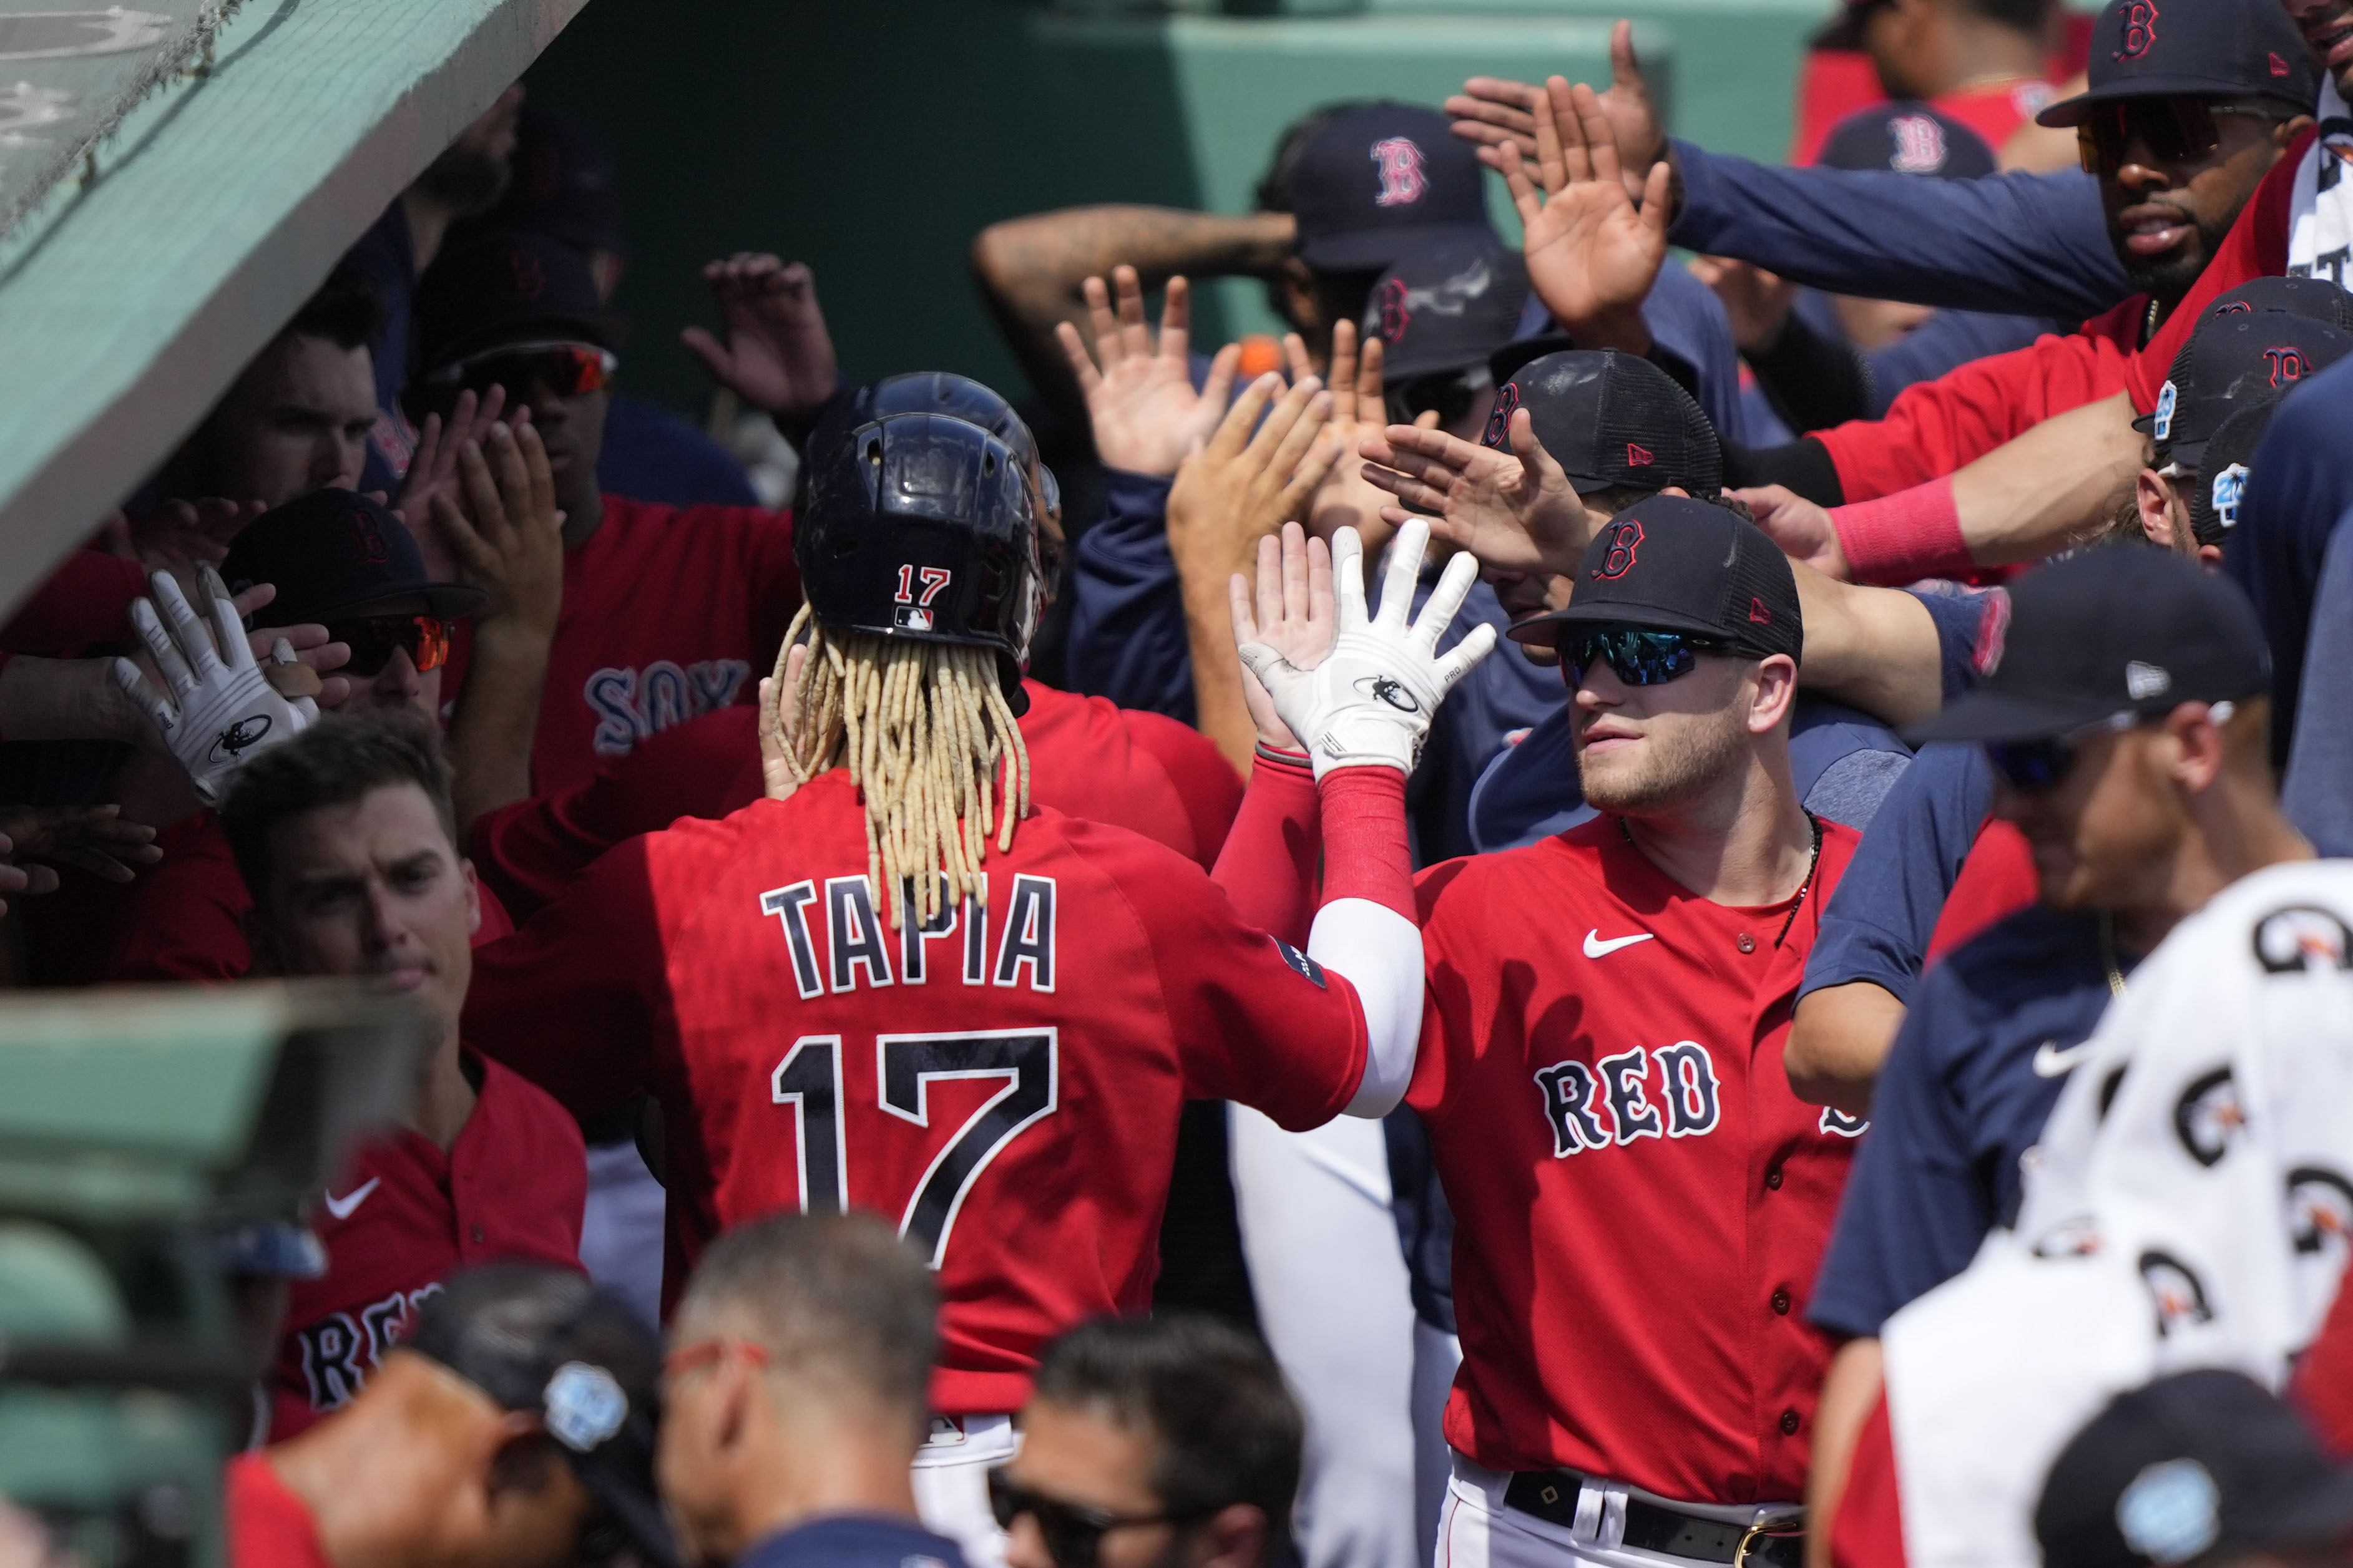 5 takeaways from the Red Sox' first home win of the 2022 season